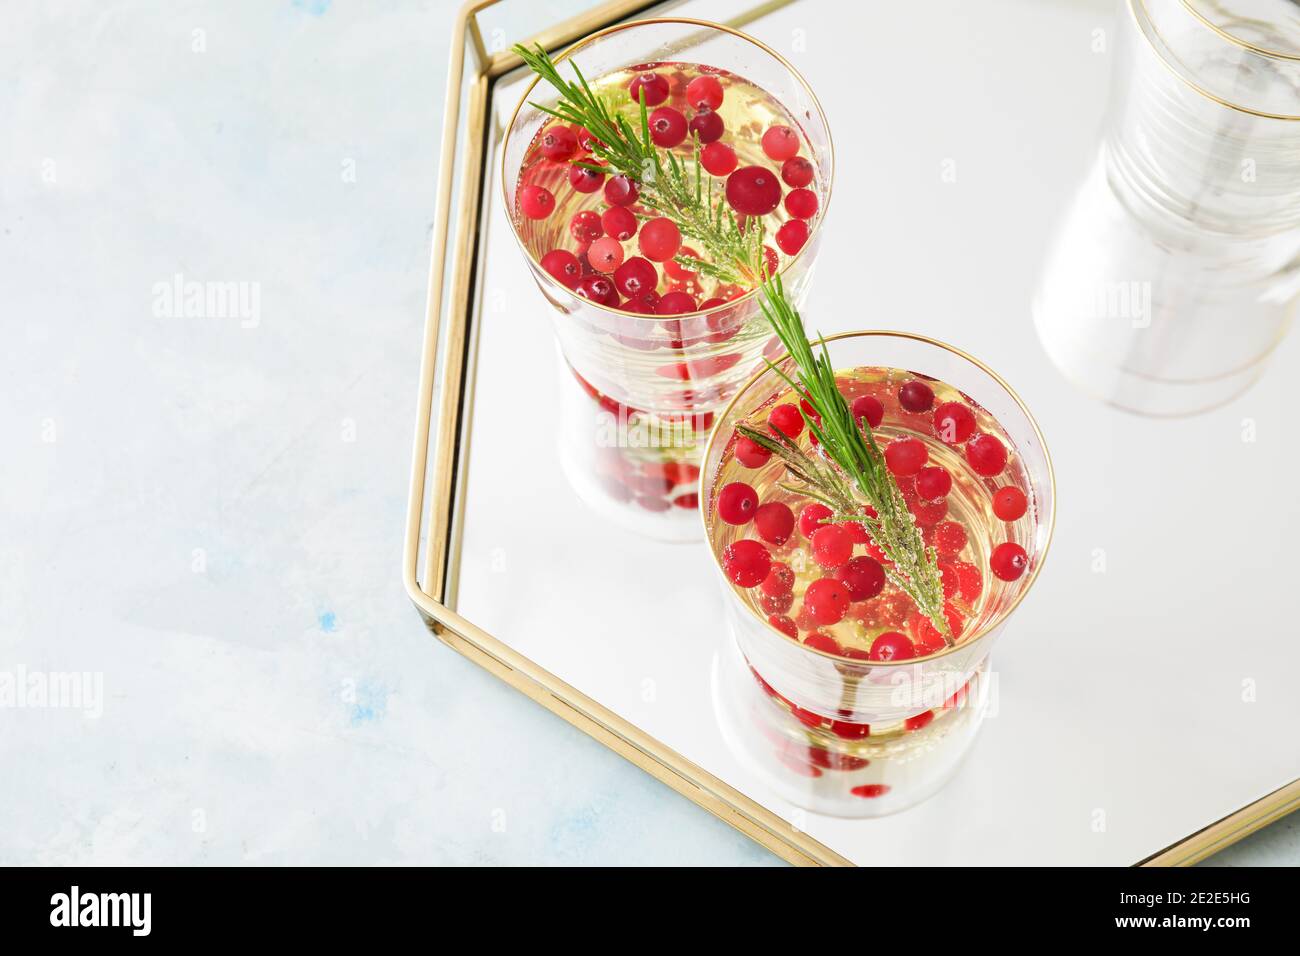 Glasses of champagne cocktail with cranberry and rosemary on tray Stock Photo